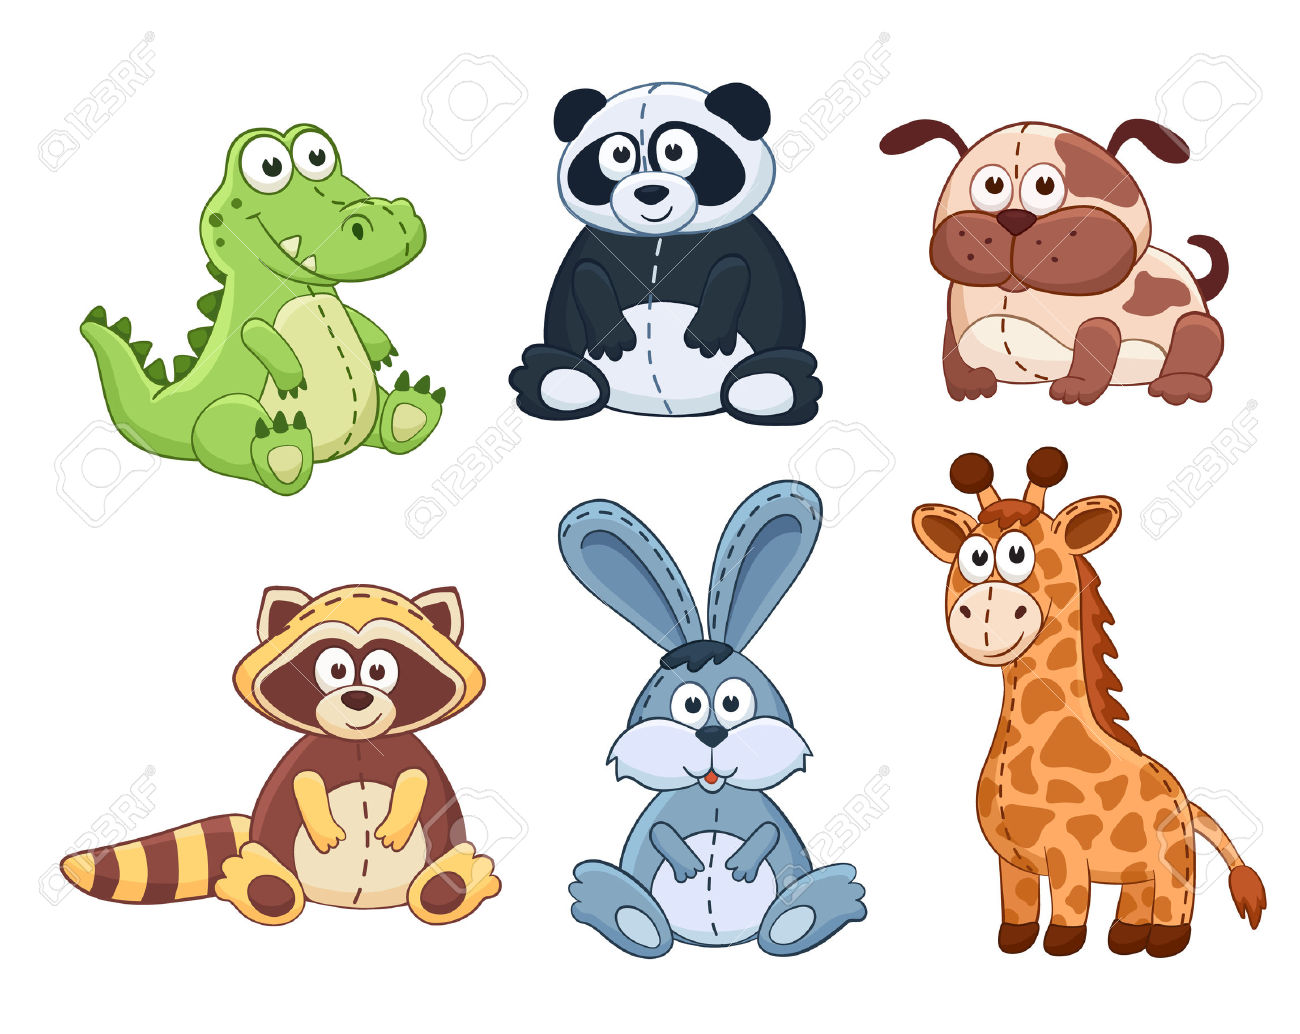 Giraffe plush toy clipart 20 free Cliparts | Download images on